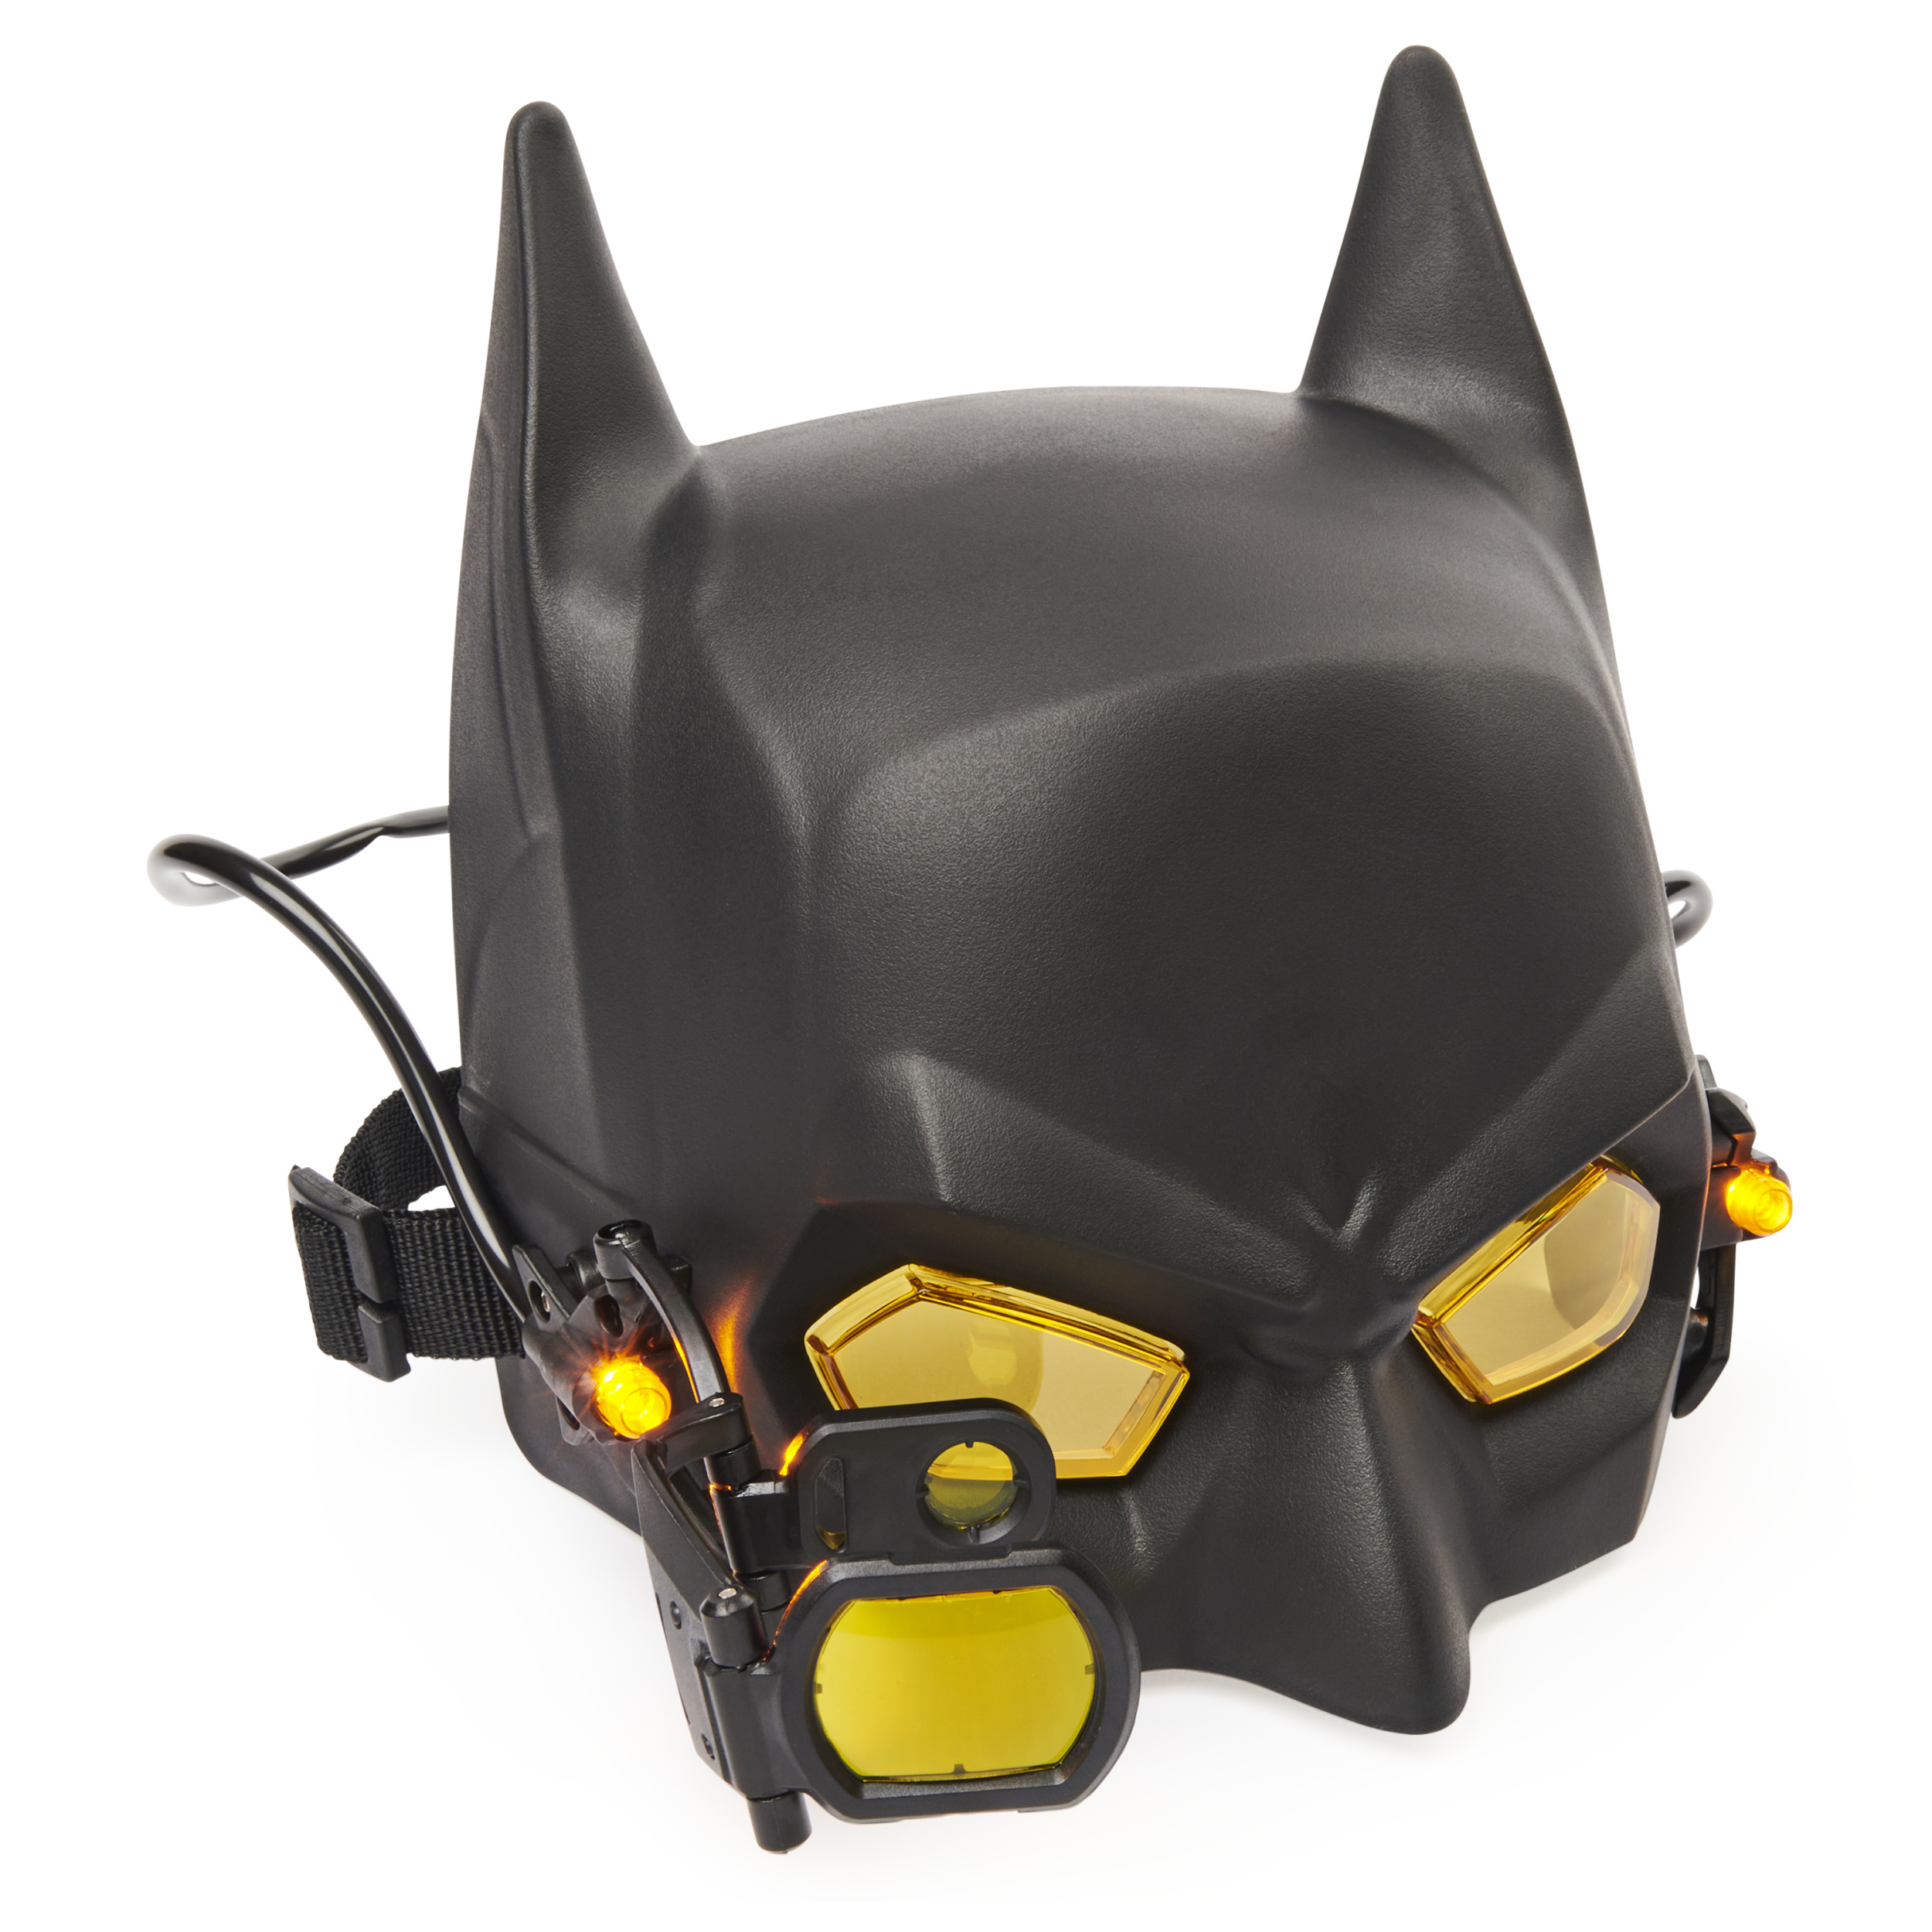 Batman Role-Play Tech Mask with Lights and Magnification Lens, for Kids Aged 4 and up - image 4 of 7